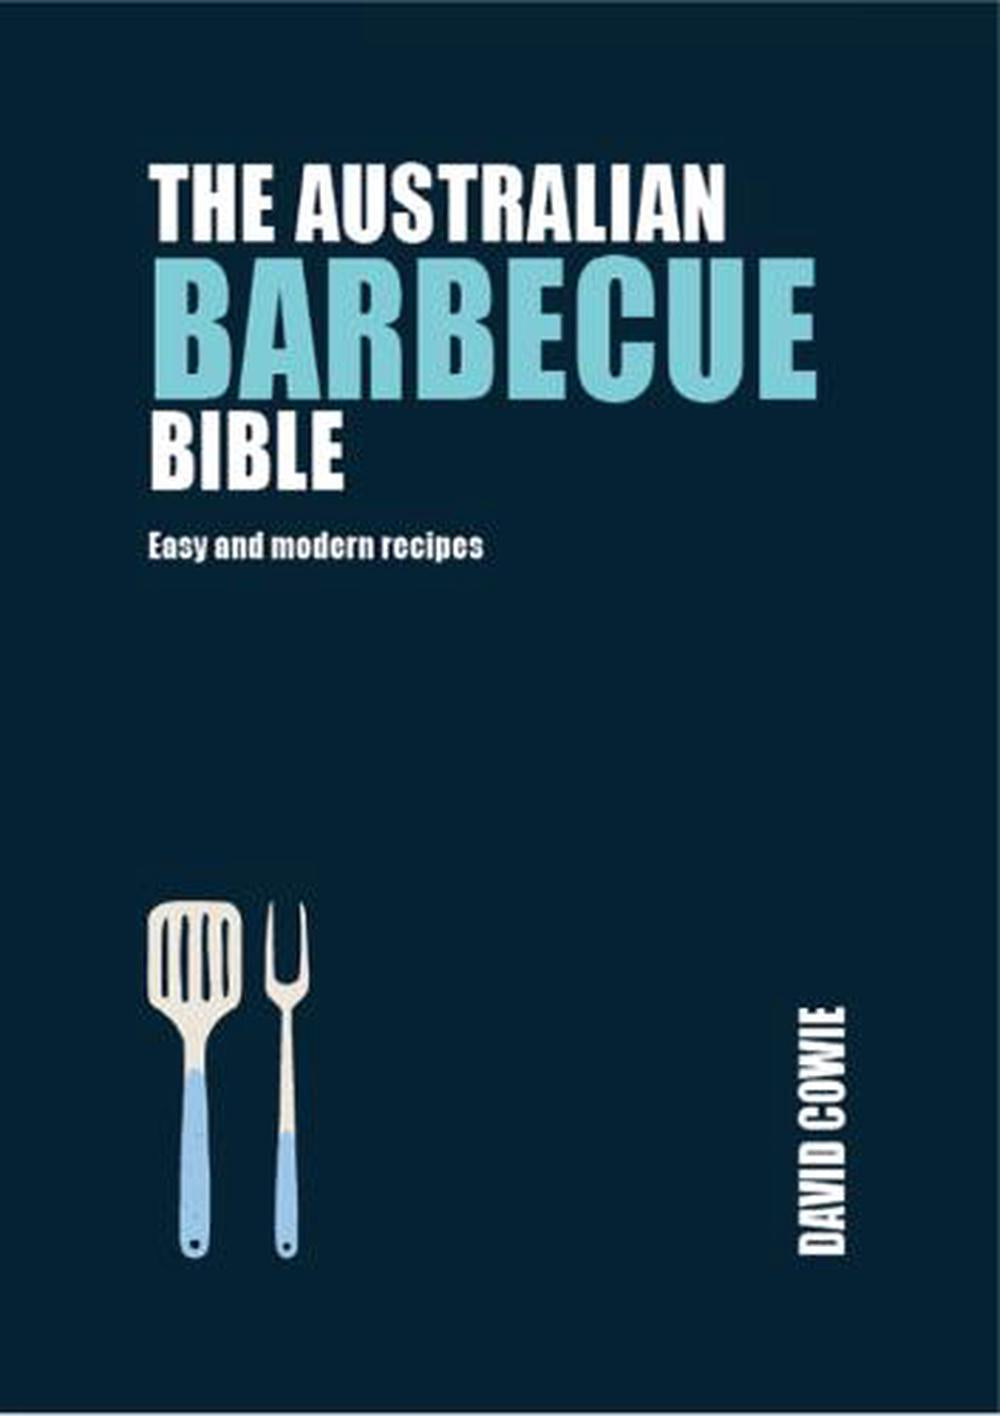 The Australian Barbecue Bible - David Cowie | Buster McGee